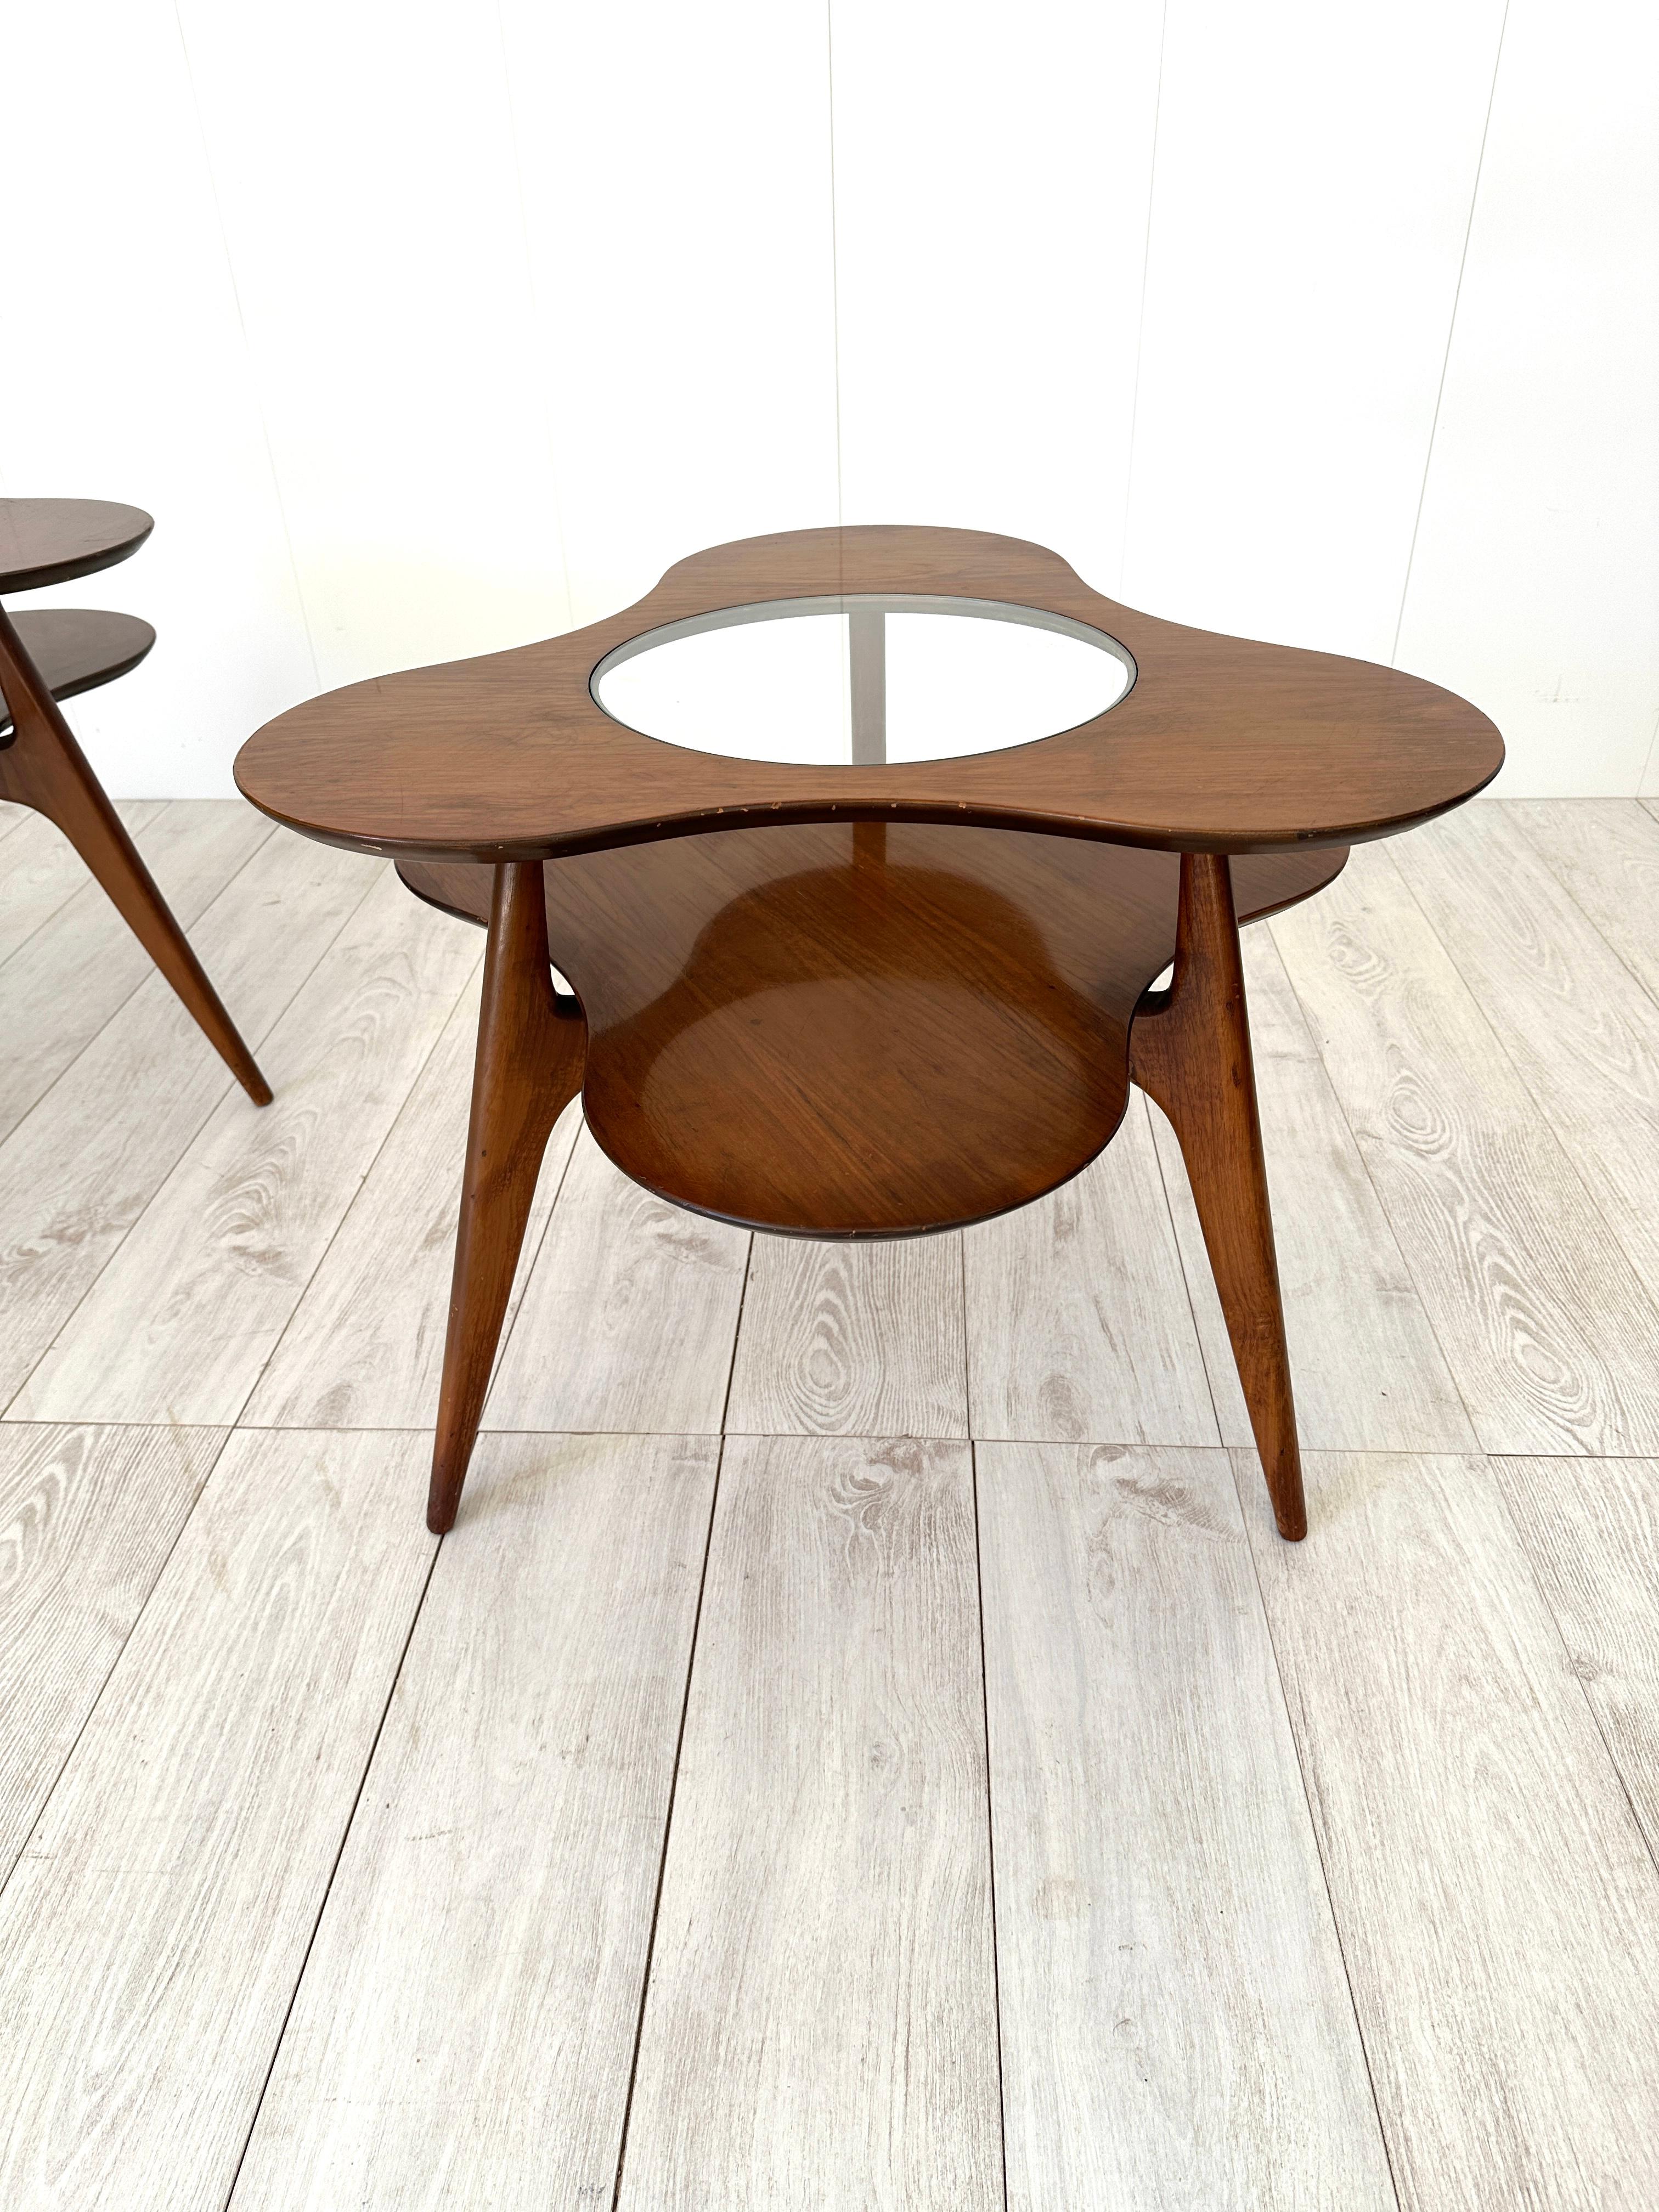 Pair of flower-shaped side tables, Italian production 1950s For Sale 3